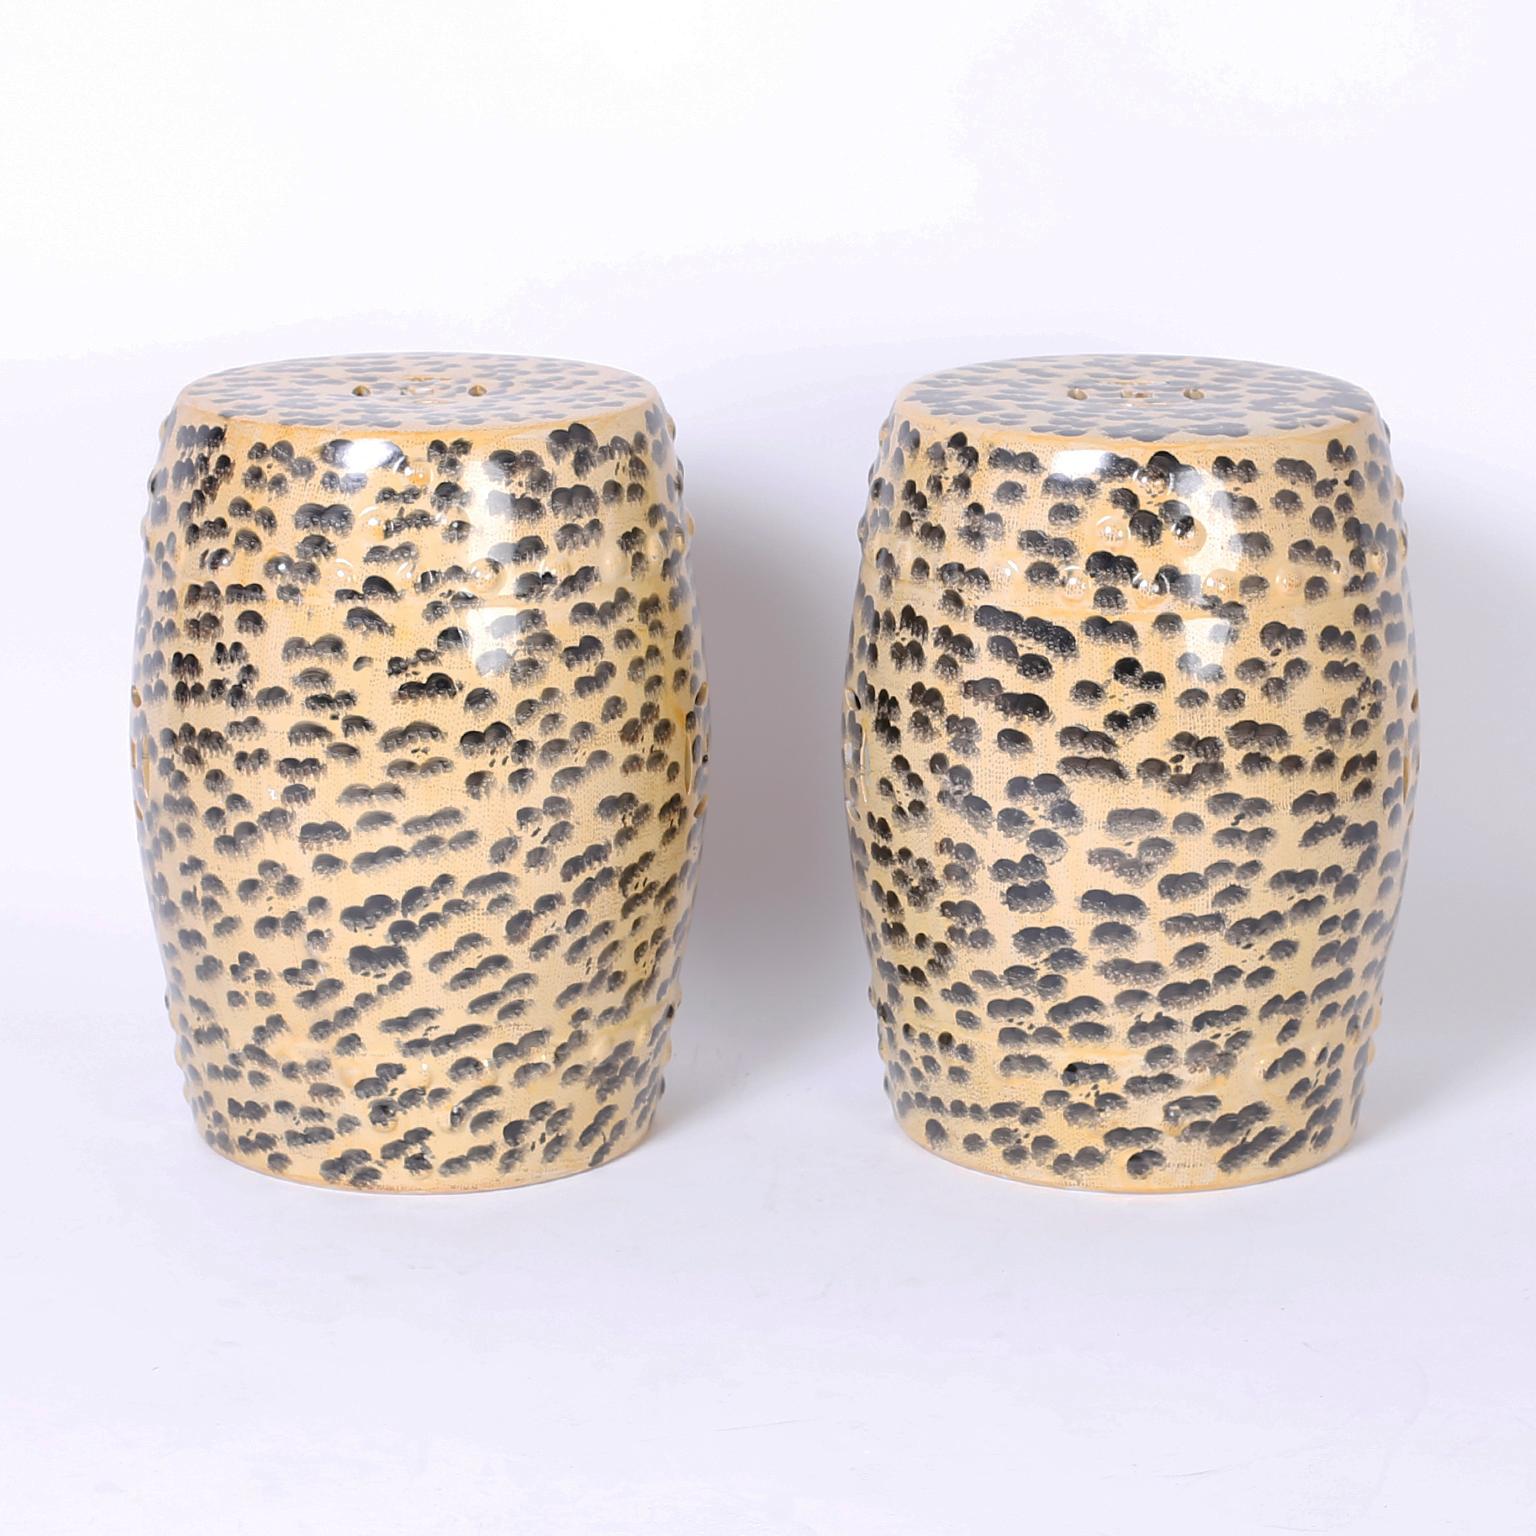 Chic pair of Chinese porcelain garden seats with a Classic form hand decorated with the unexpected, yet welcomed leopard print.